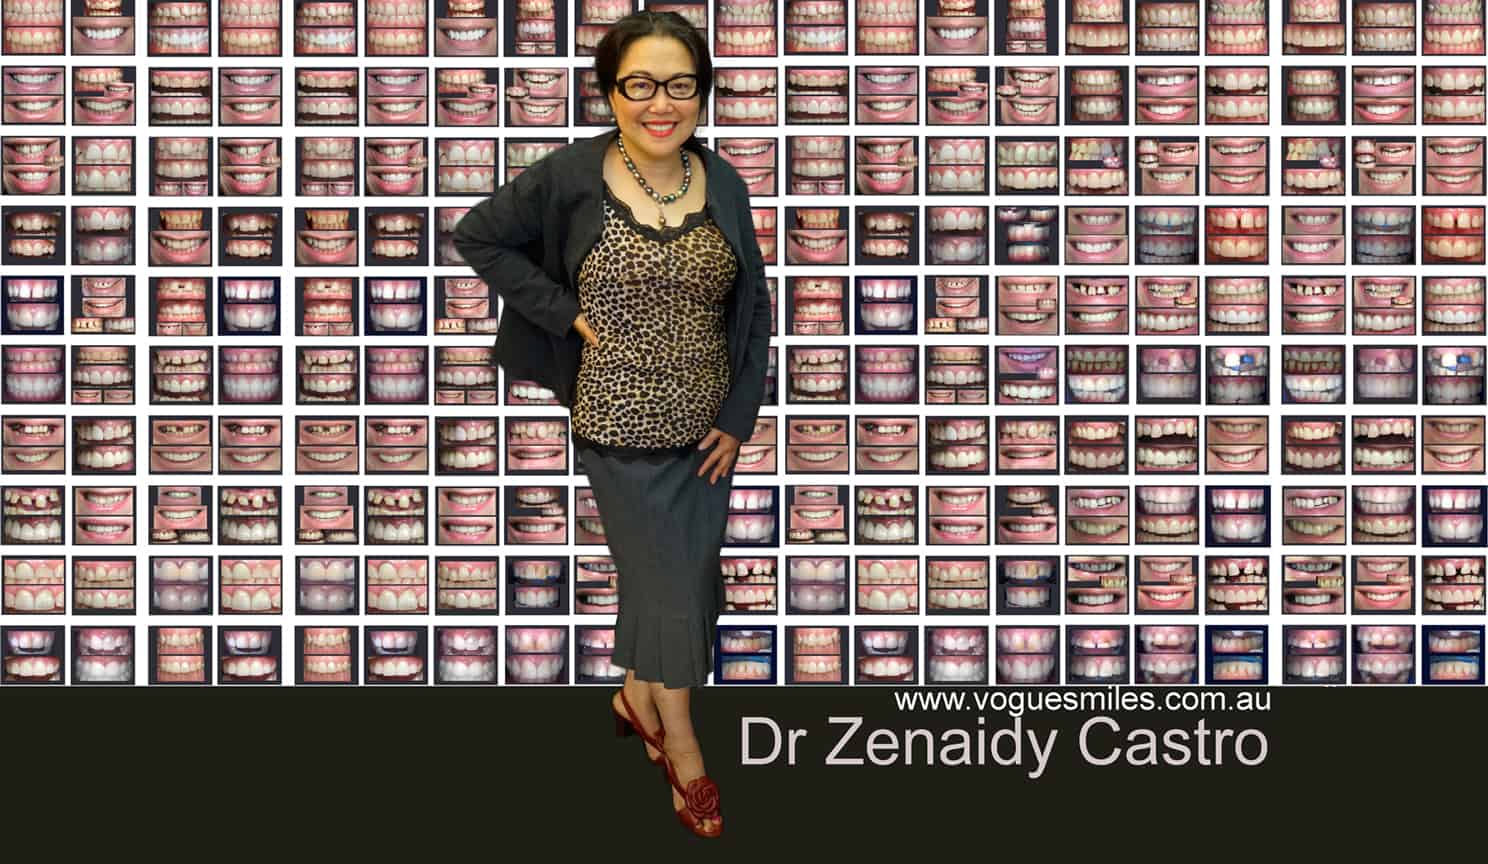 Best Australian Photographer, Abstract Artist and Dentist -BEST COSMETIC DENTIST IN MELBOURNE -DR ZENAIDY CASTRO